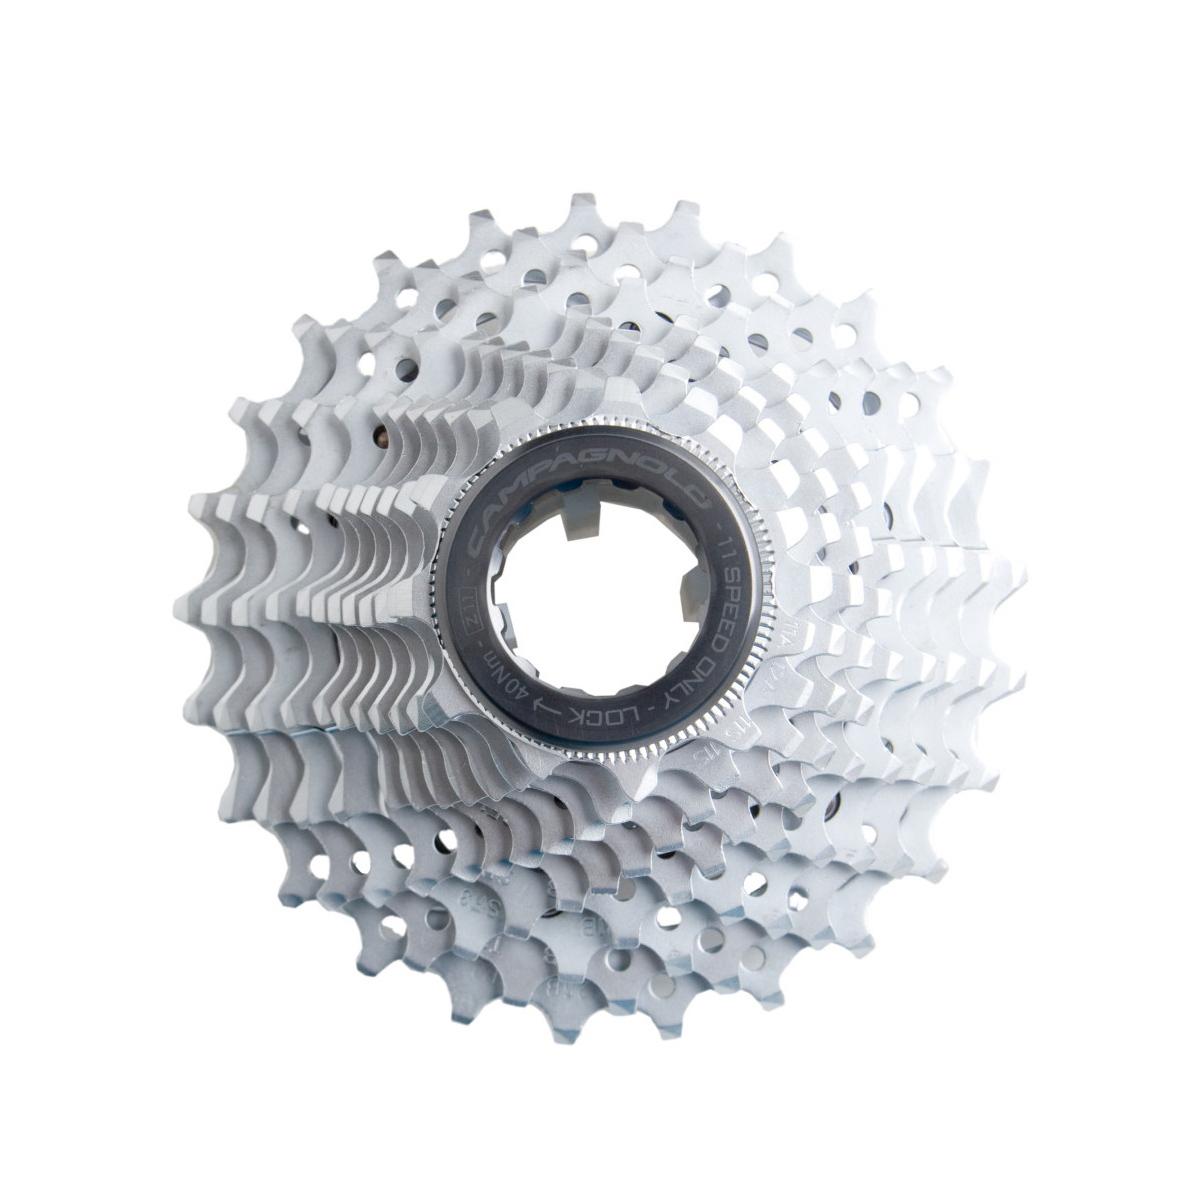 CAMPAGNOLO Chorus Cassette 11 Speed US 11-25t